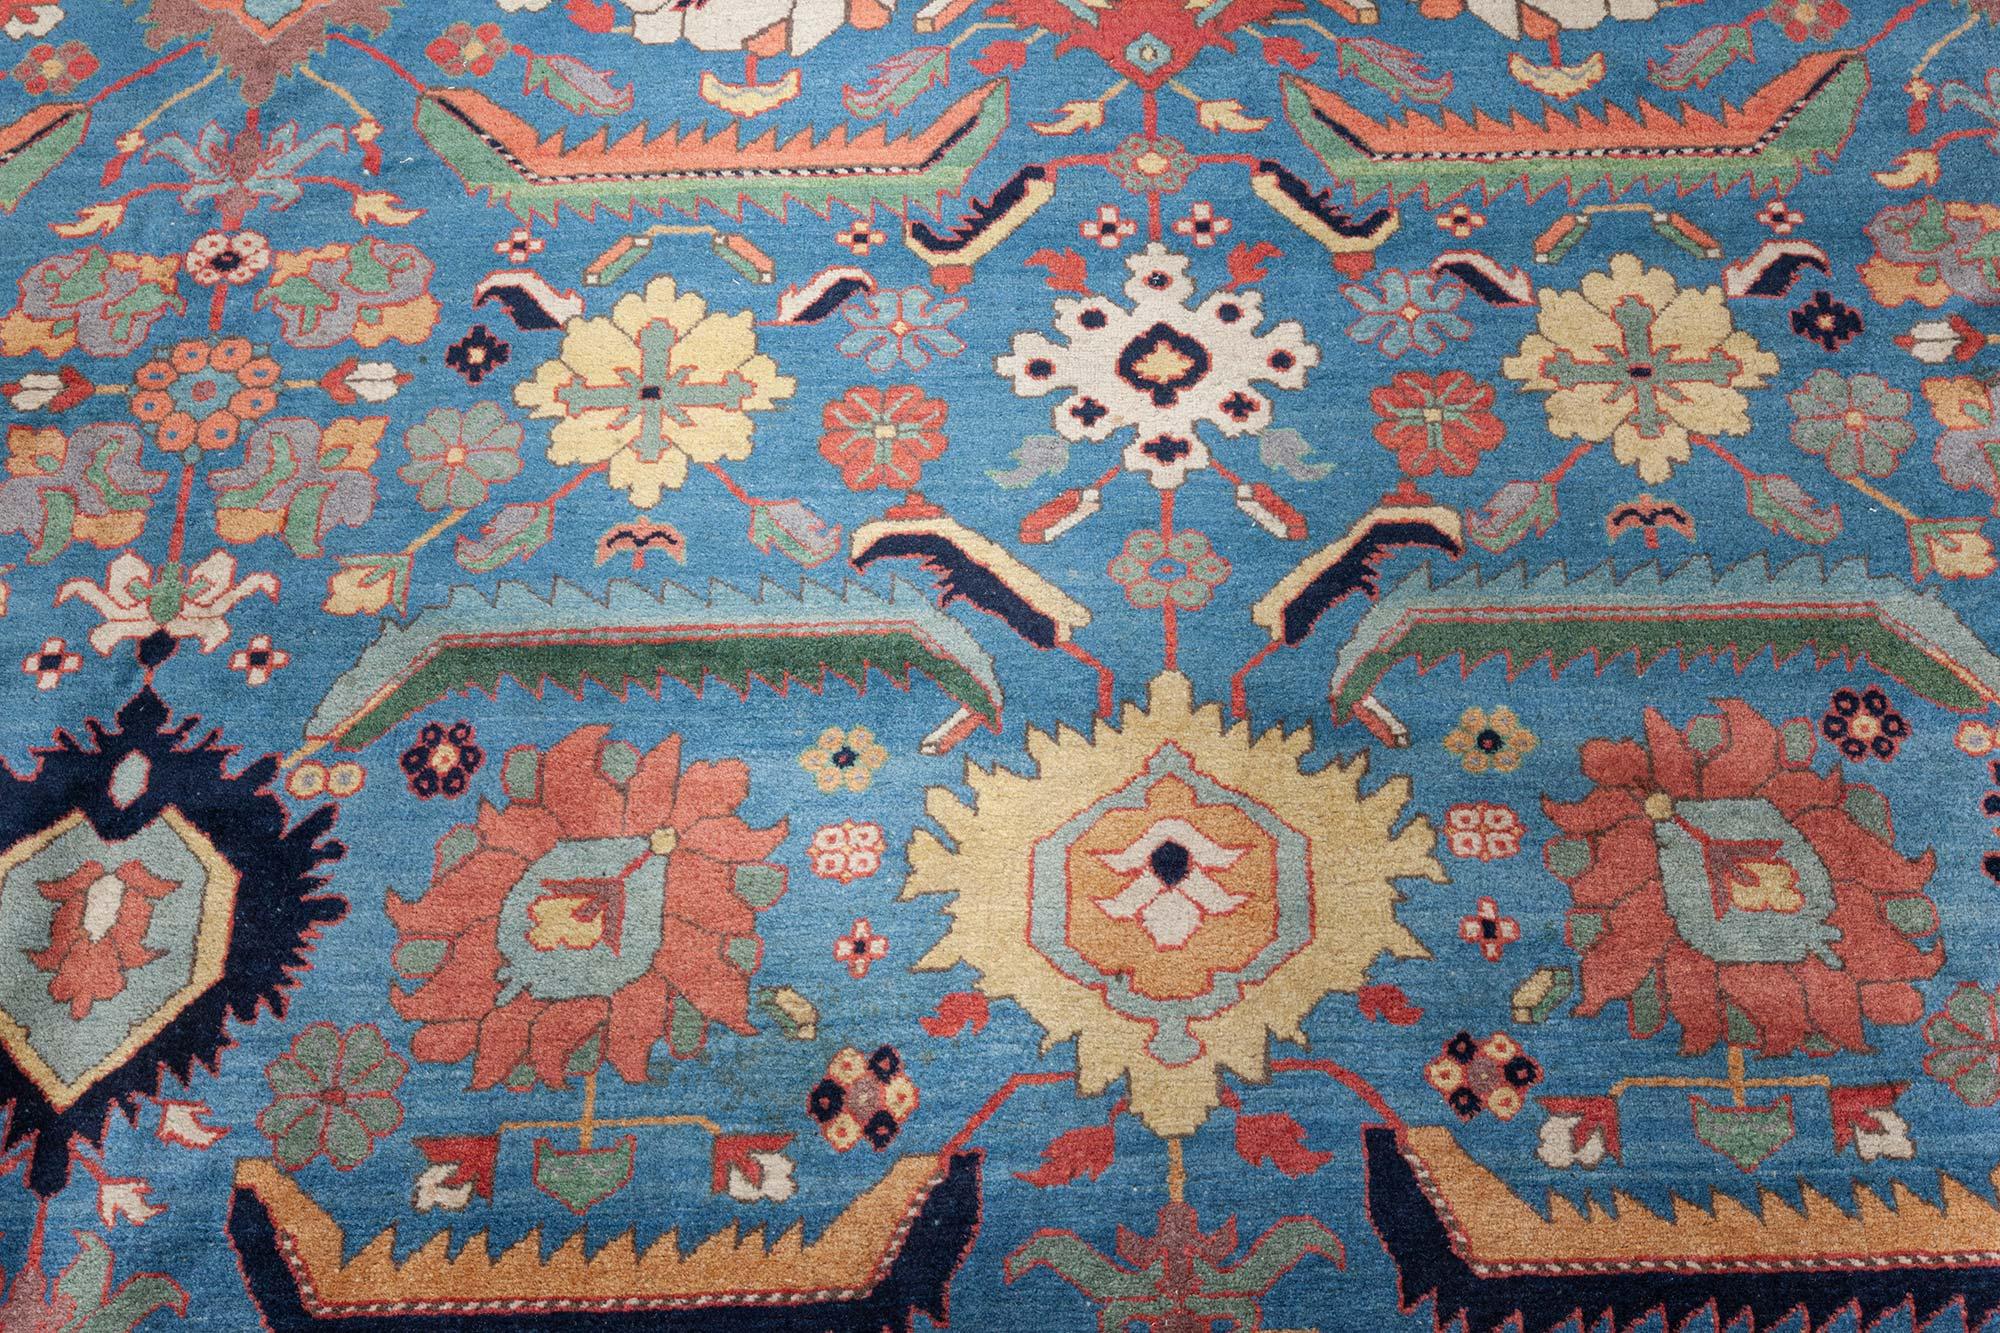 Hand-Woven Persian Tabriz Rug With a Cintamani insignia in one corner For Sale